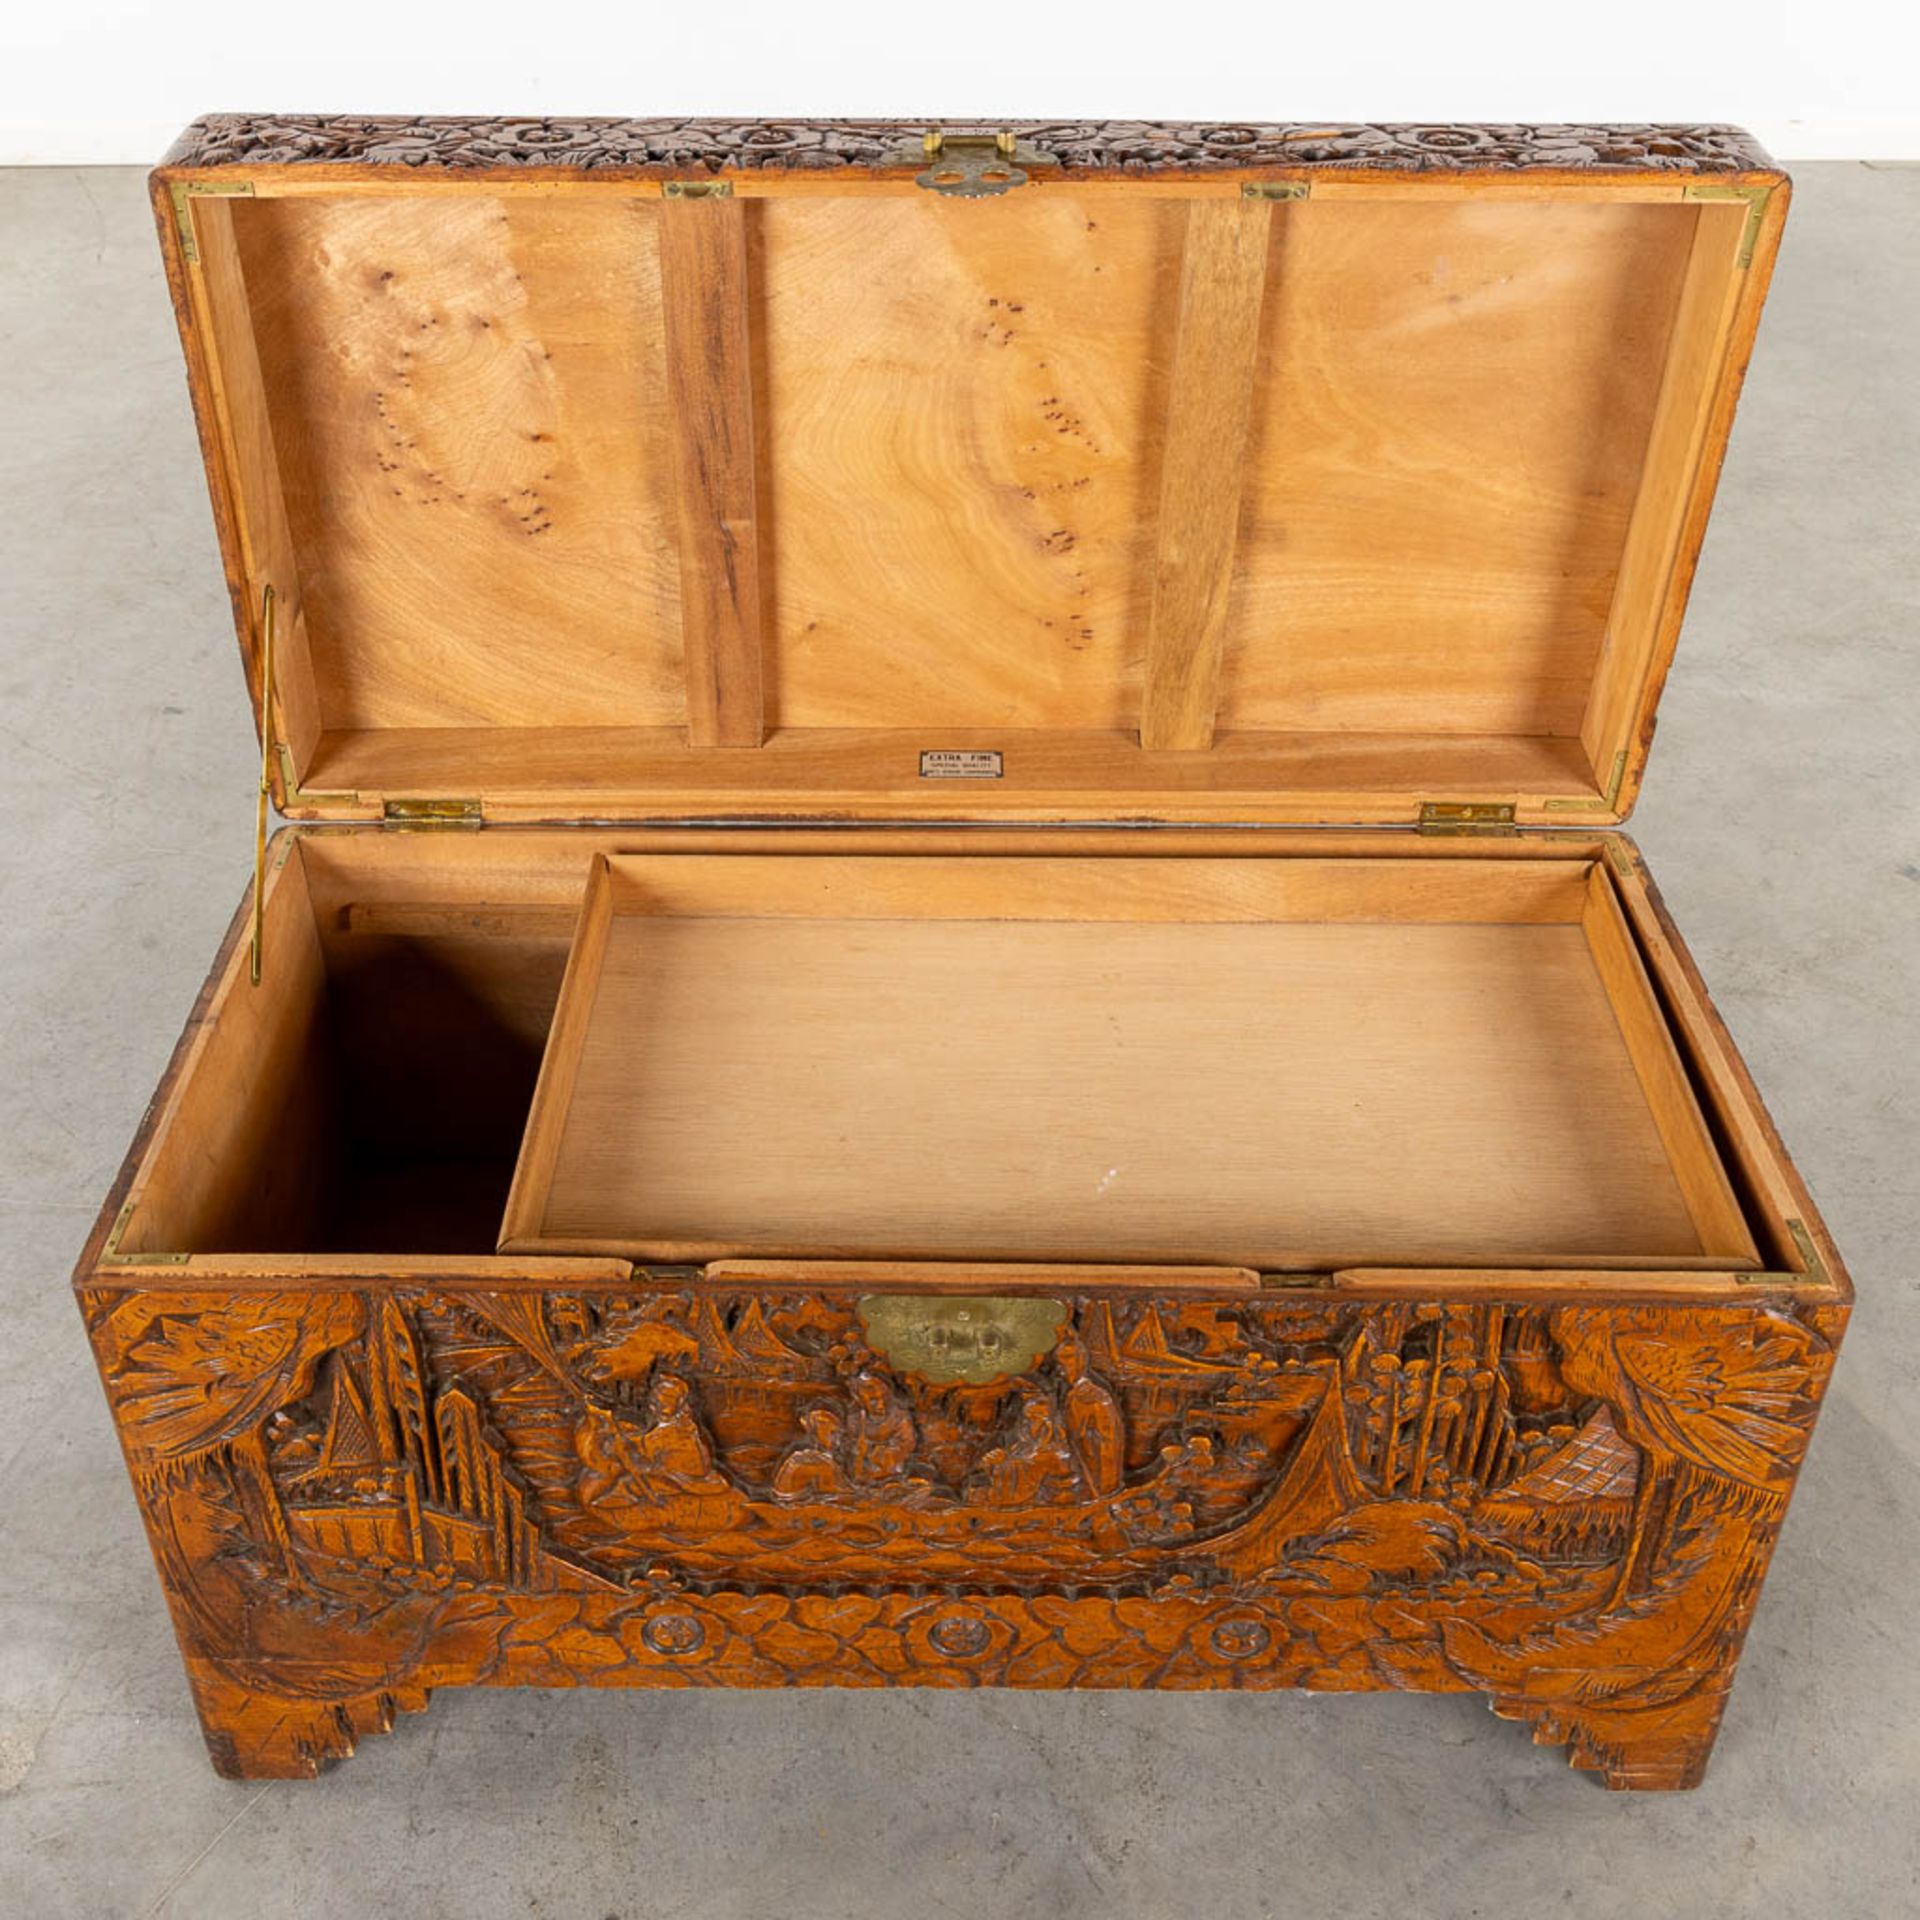 Two Oriental chests, tropical hardwood. Probably Myanmar. (L:50 x W:102 x H:60 cm) - Image 19 of 21